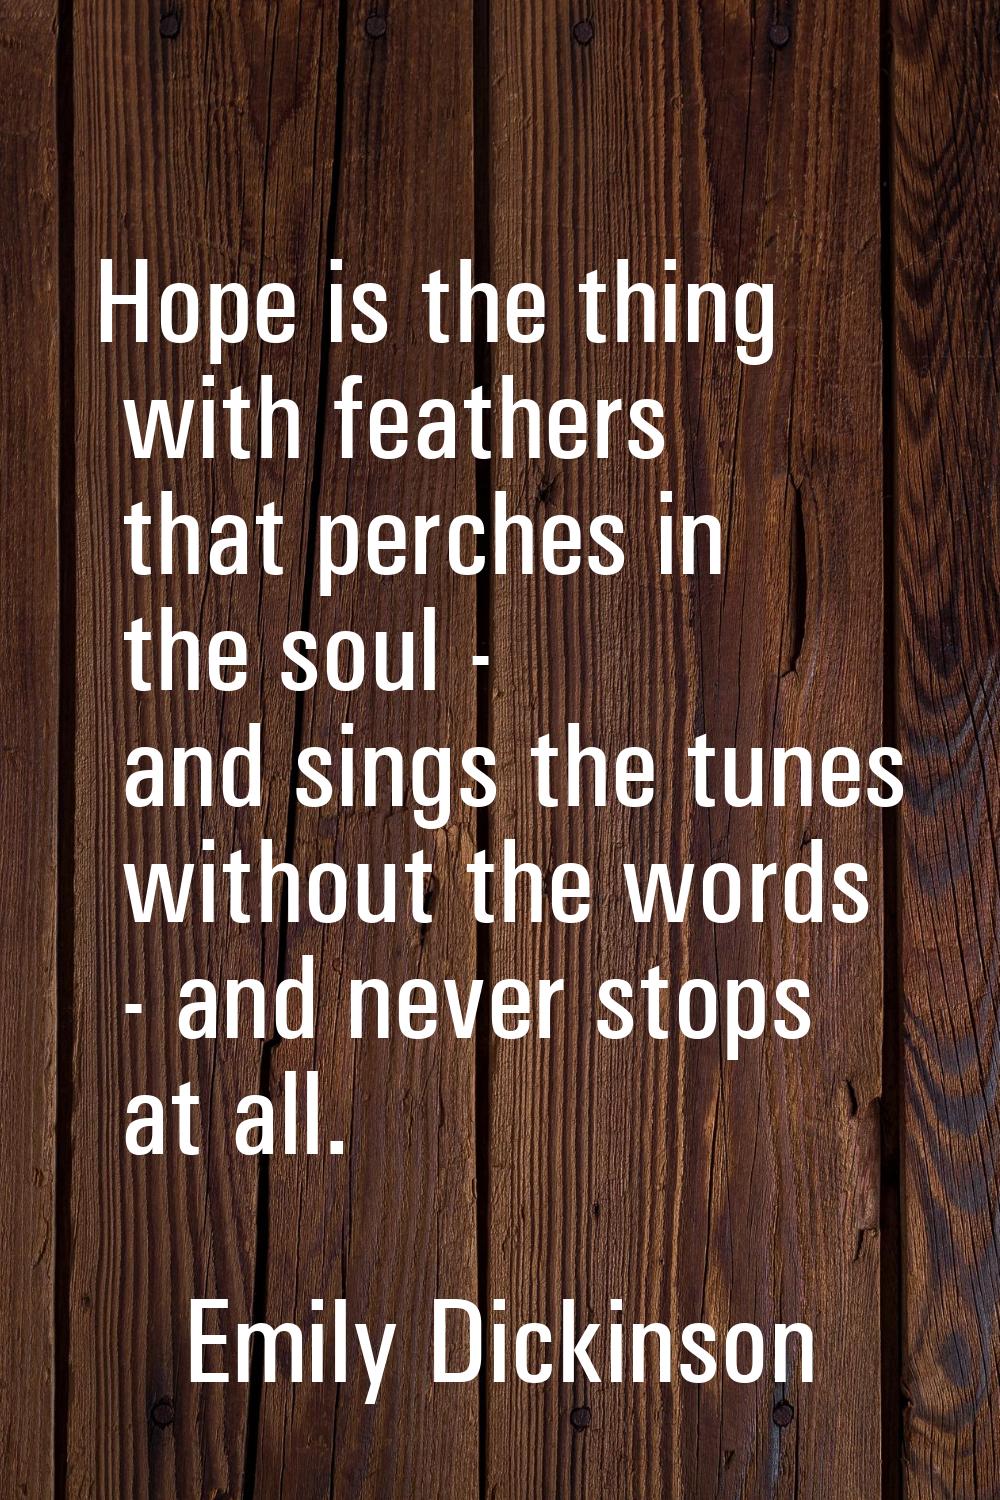 Hope is the thing with feathers that perches in the soul - and sings the tunes without the words - 